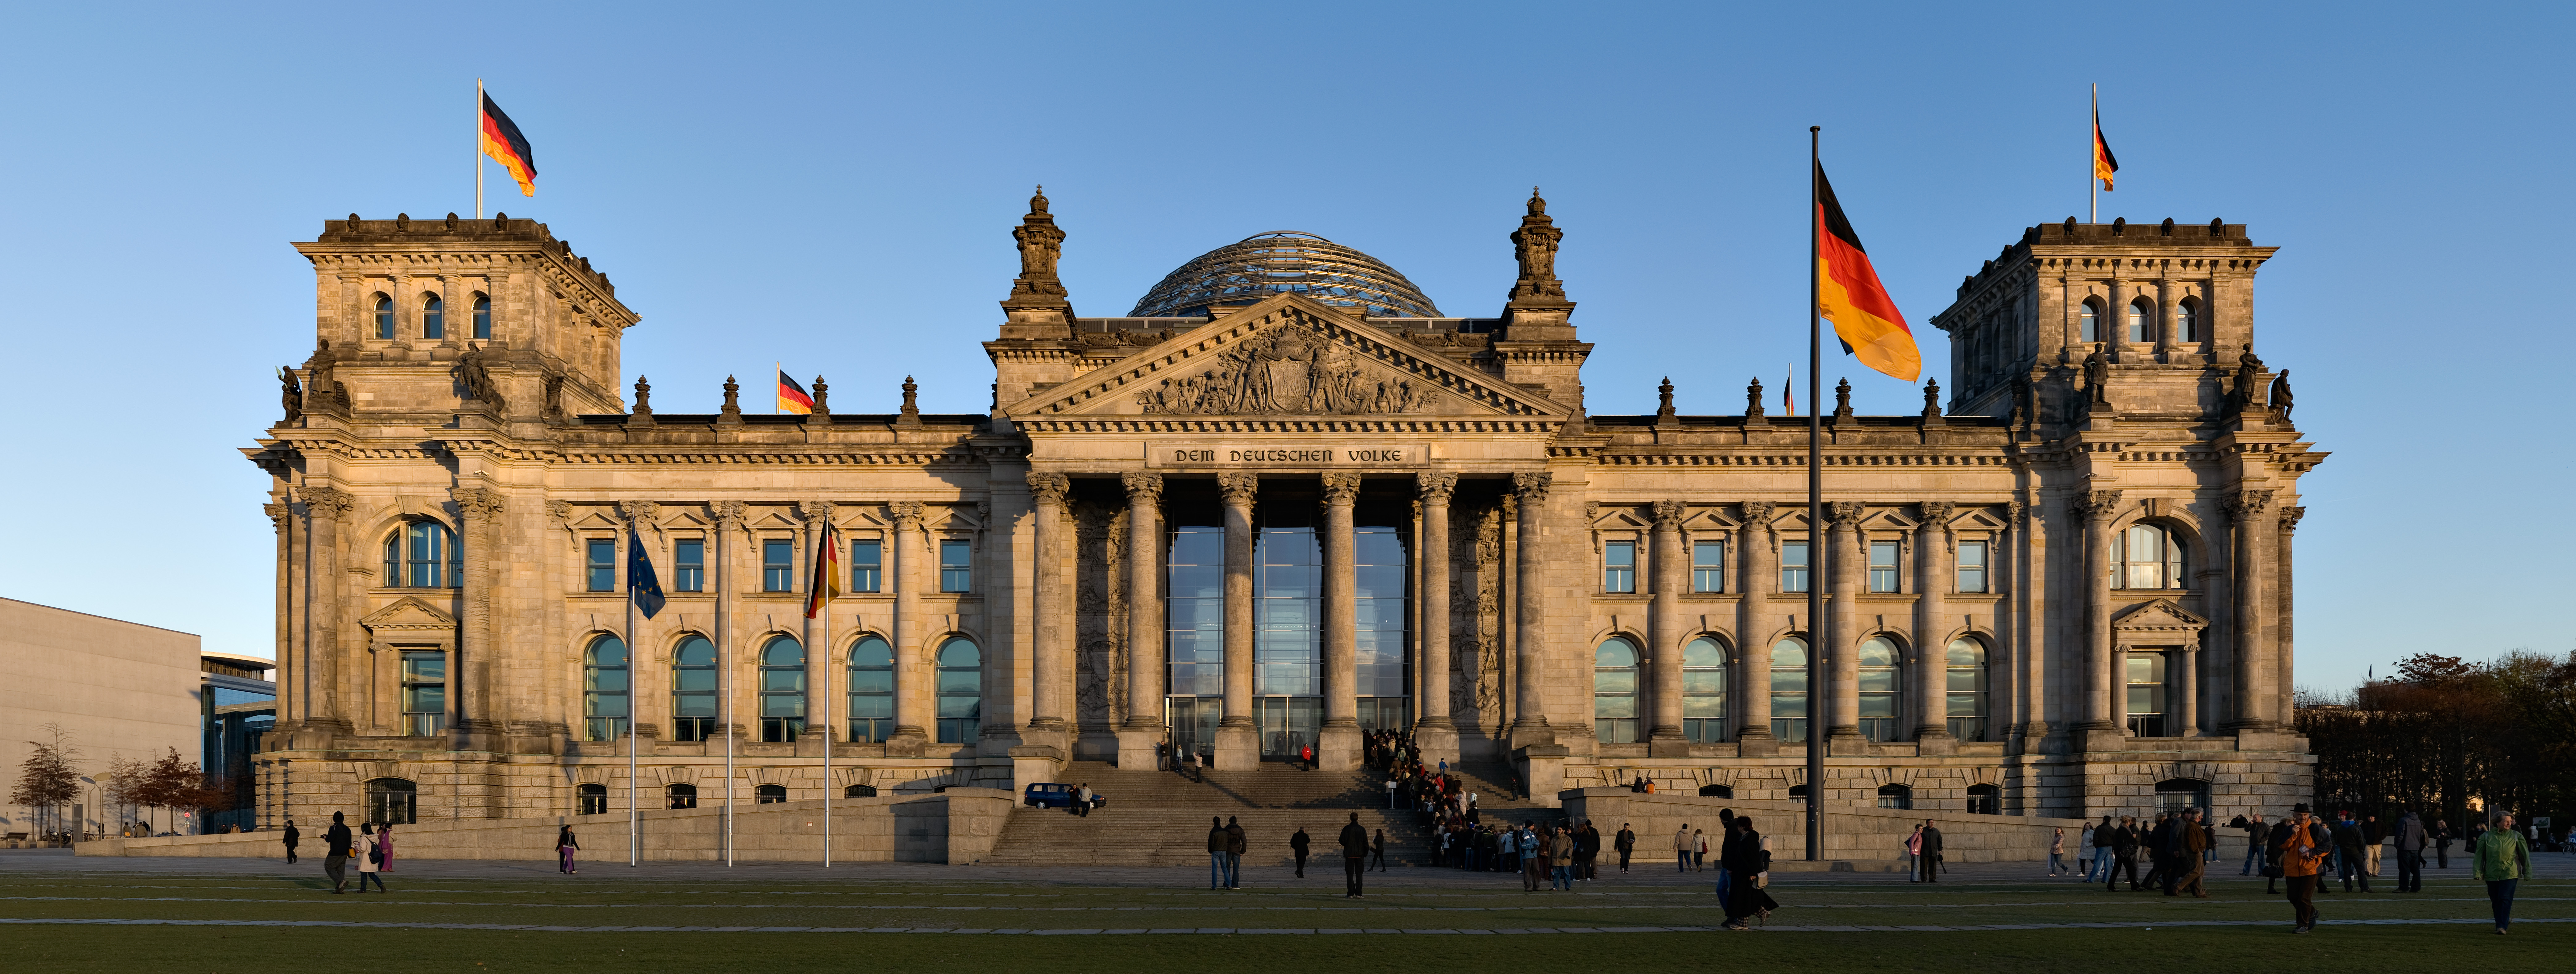 File:Reichstag building Berlin view from west before sunset.jpg ...